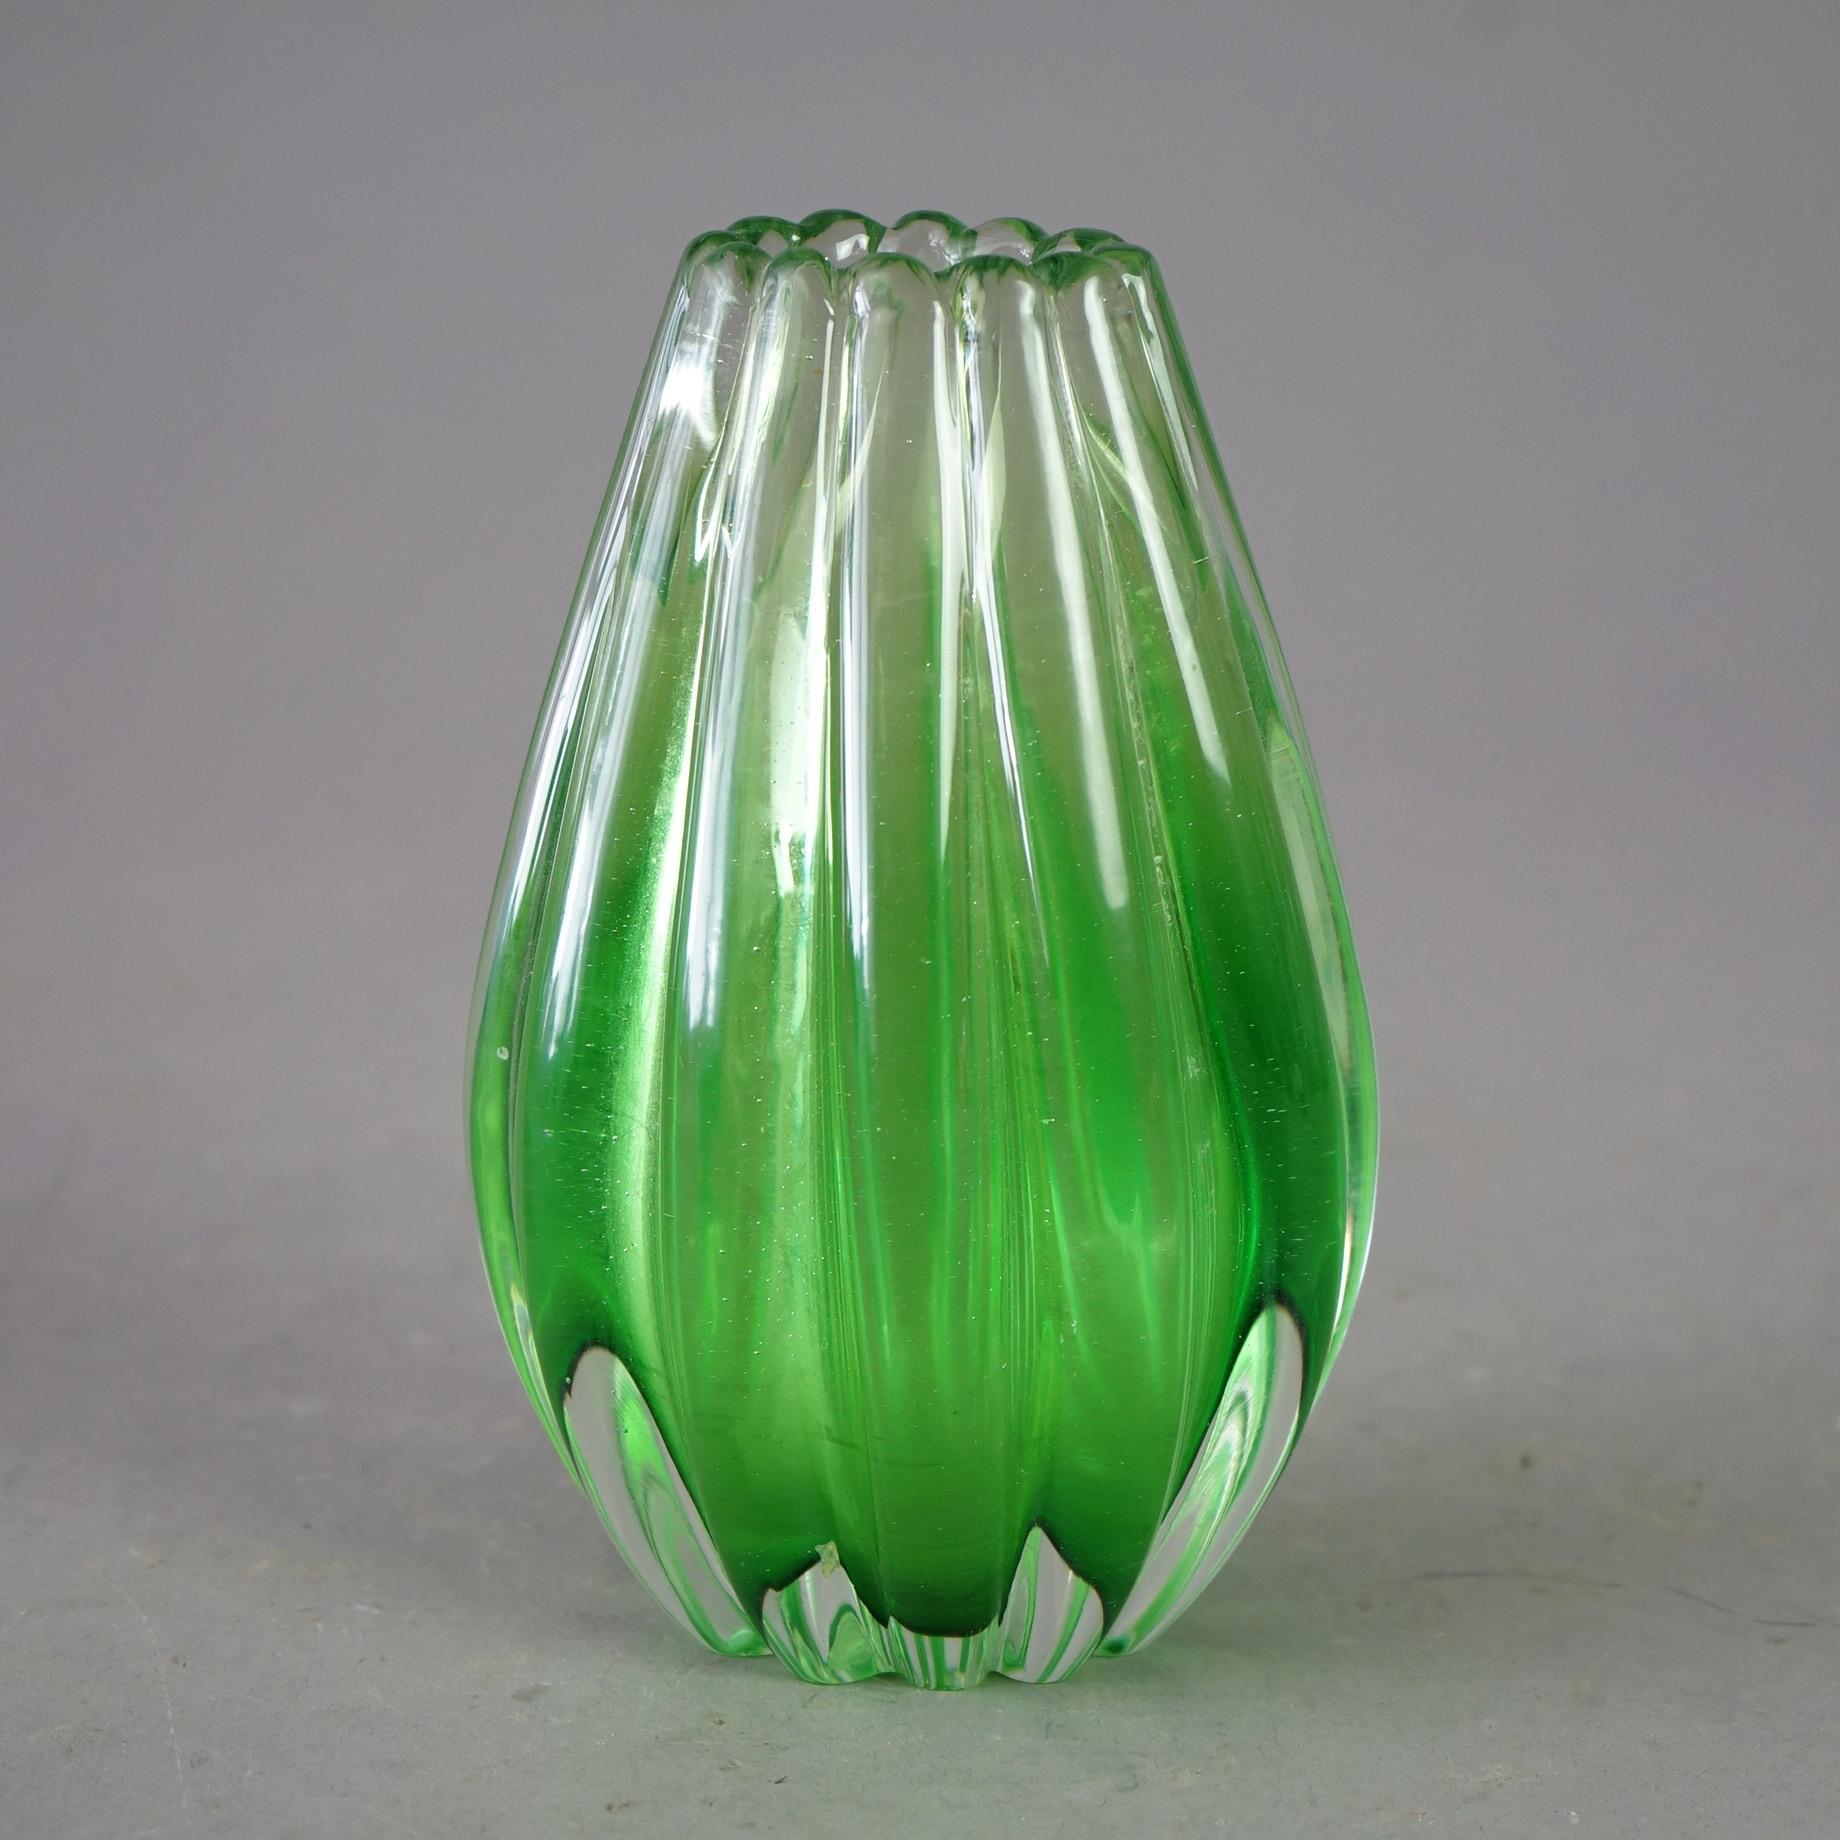 A Mid Century Italian vase in the manner of Murano Barovier & Toso offers colorless cased emerald green art glass construction, circa 1950

Measures - 7